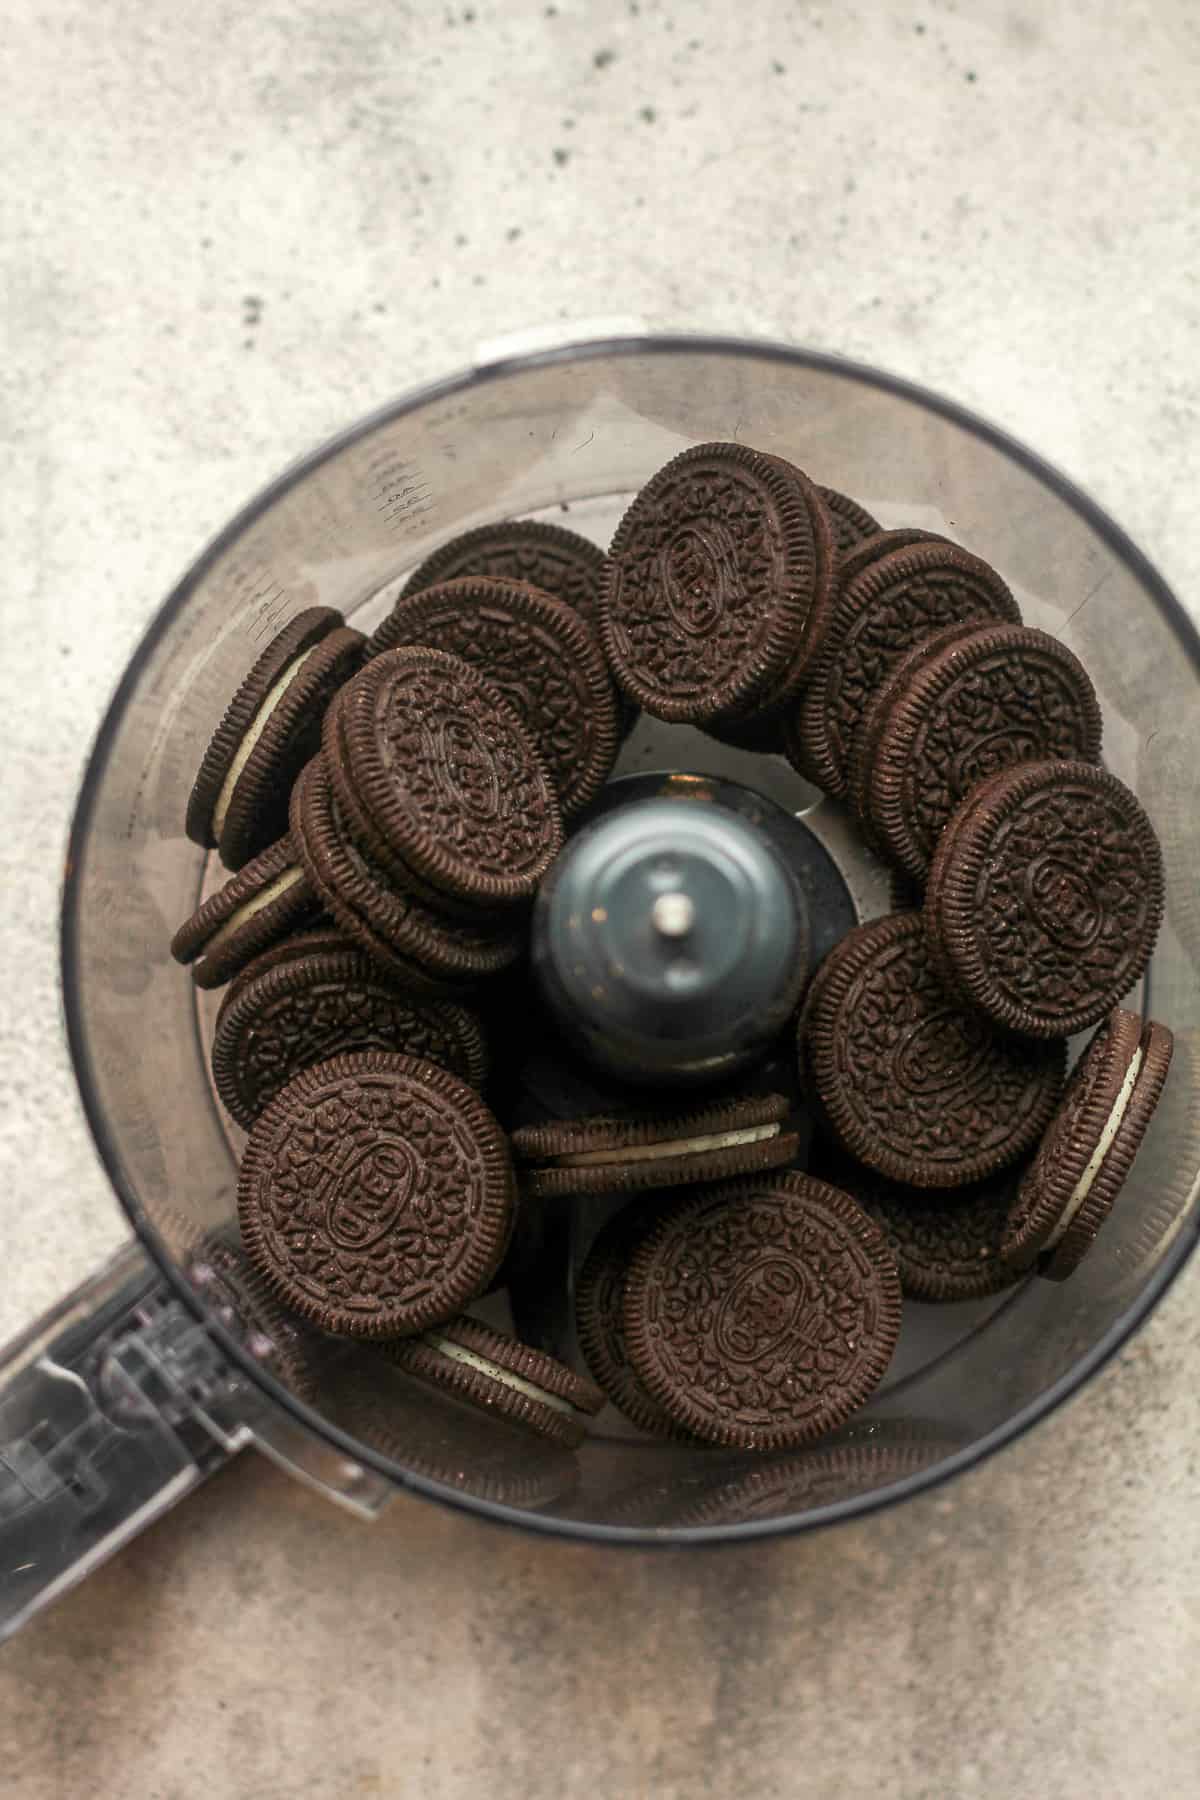 A food porcessor with Oreo cookies inside.